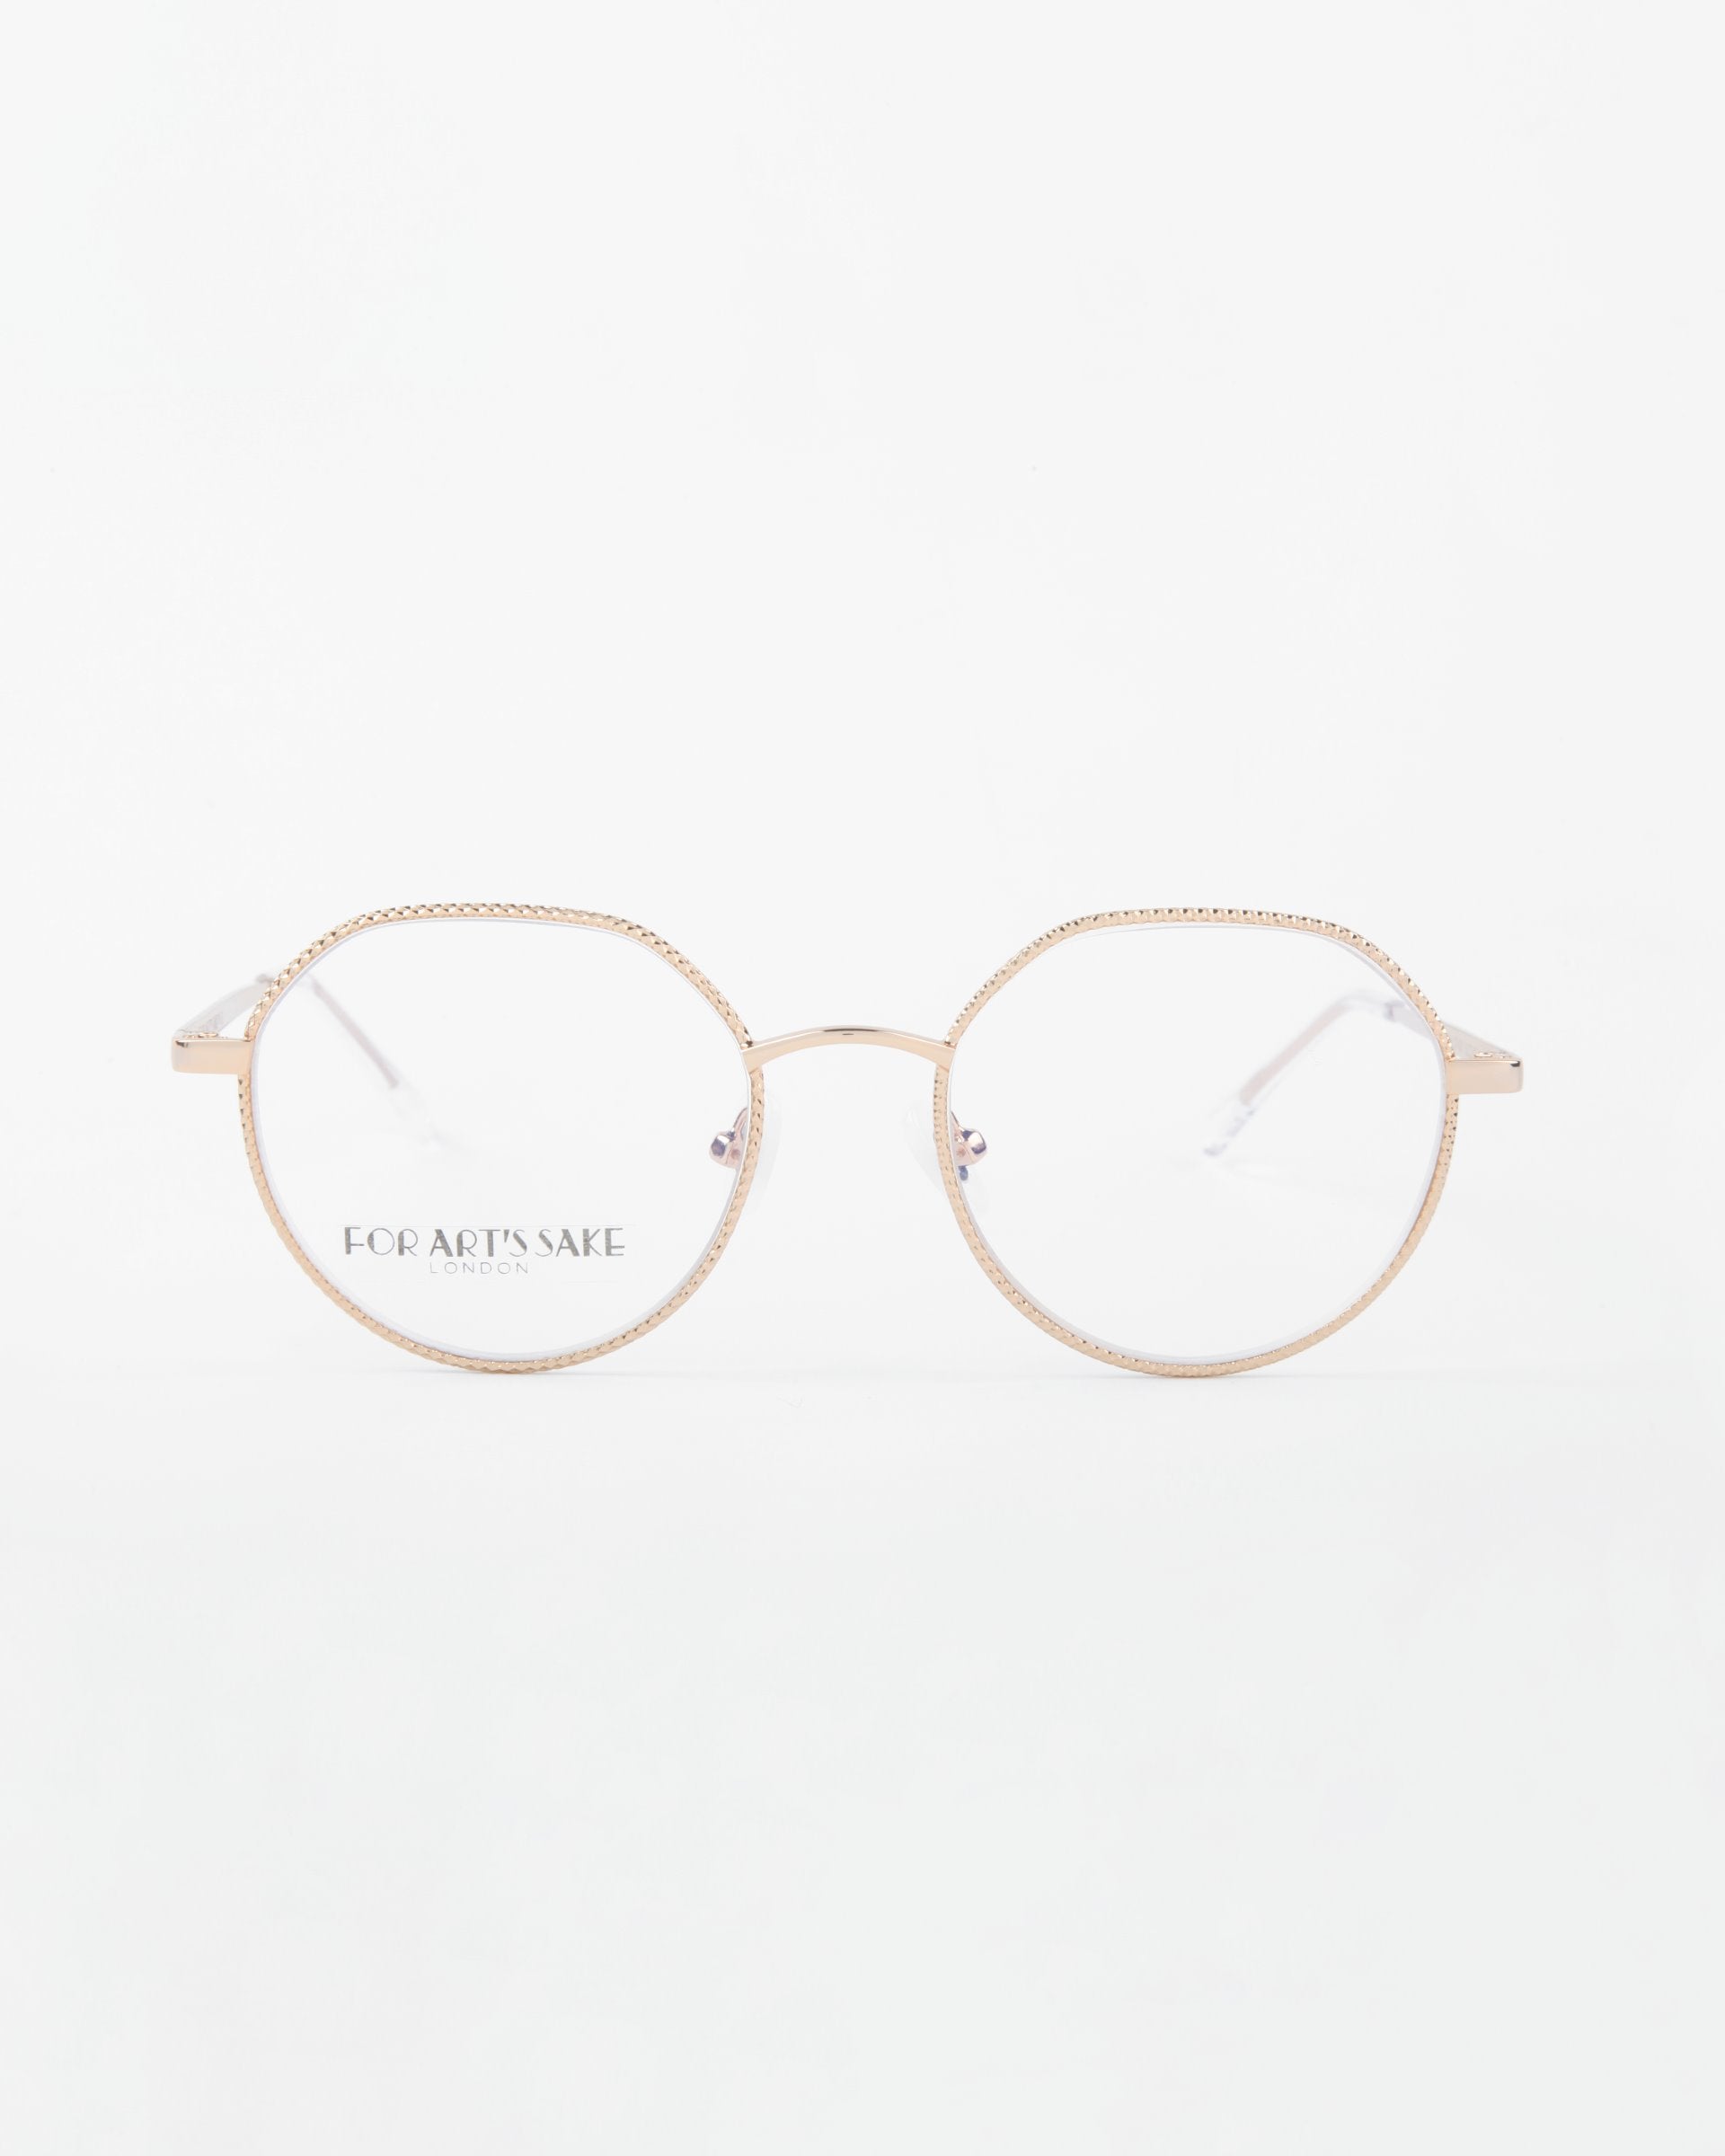 A pair of Hope eyeglasses by For Art's Sake® with thin, 18-karat gold-plated frames and clear lenses. The words "For Art's Sake" are visible on one of the lenses. The background is white, emphasizing the minimalist design of the glasses. These stylish frames can also come with a Blue Light Filter for added protection.